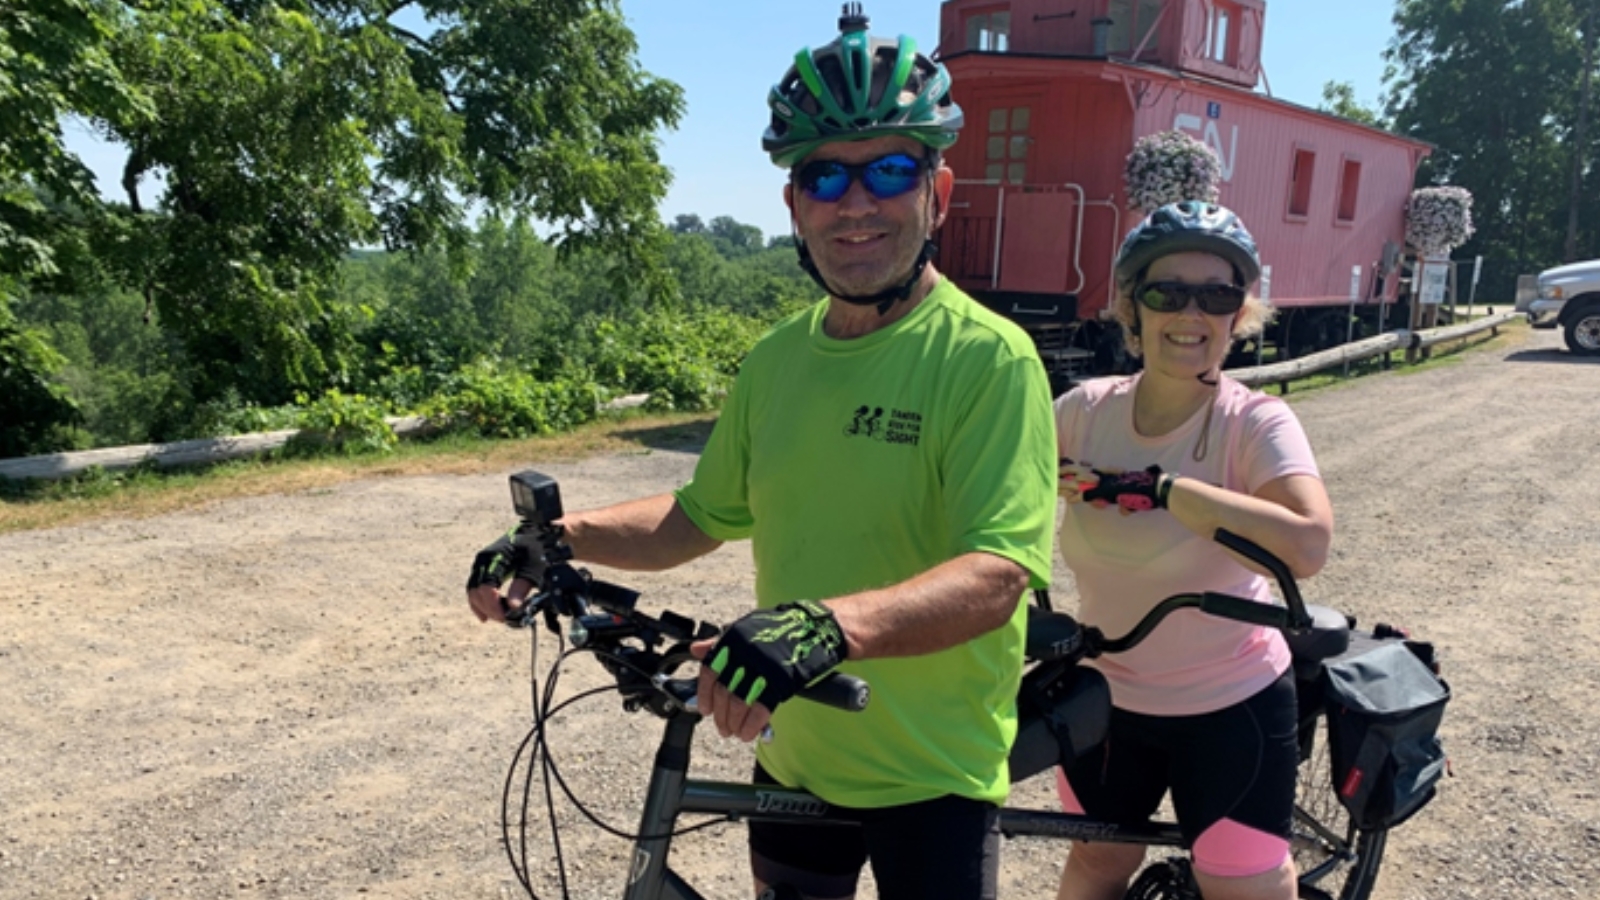 Amber Needham and her friend on a tandem bike with a train in the background on a warm sunny summer day.